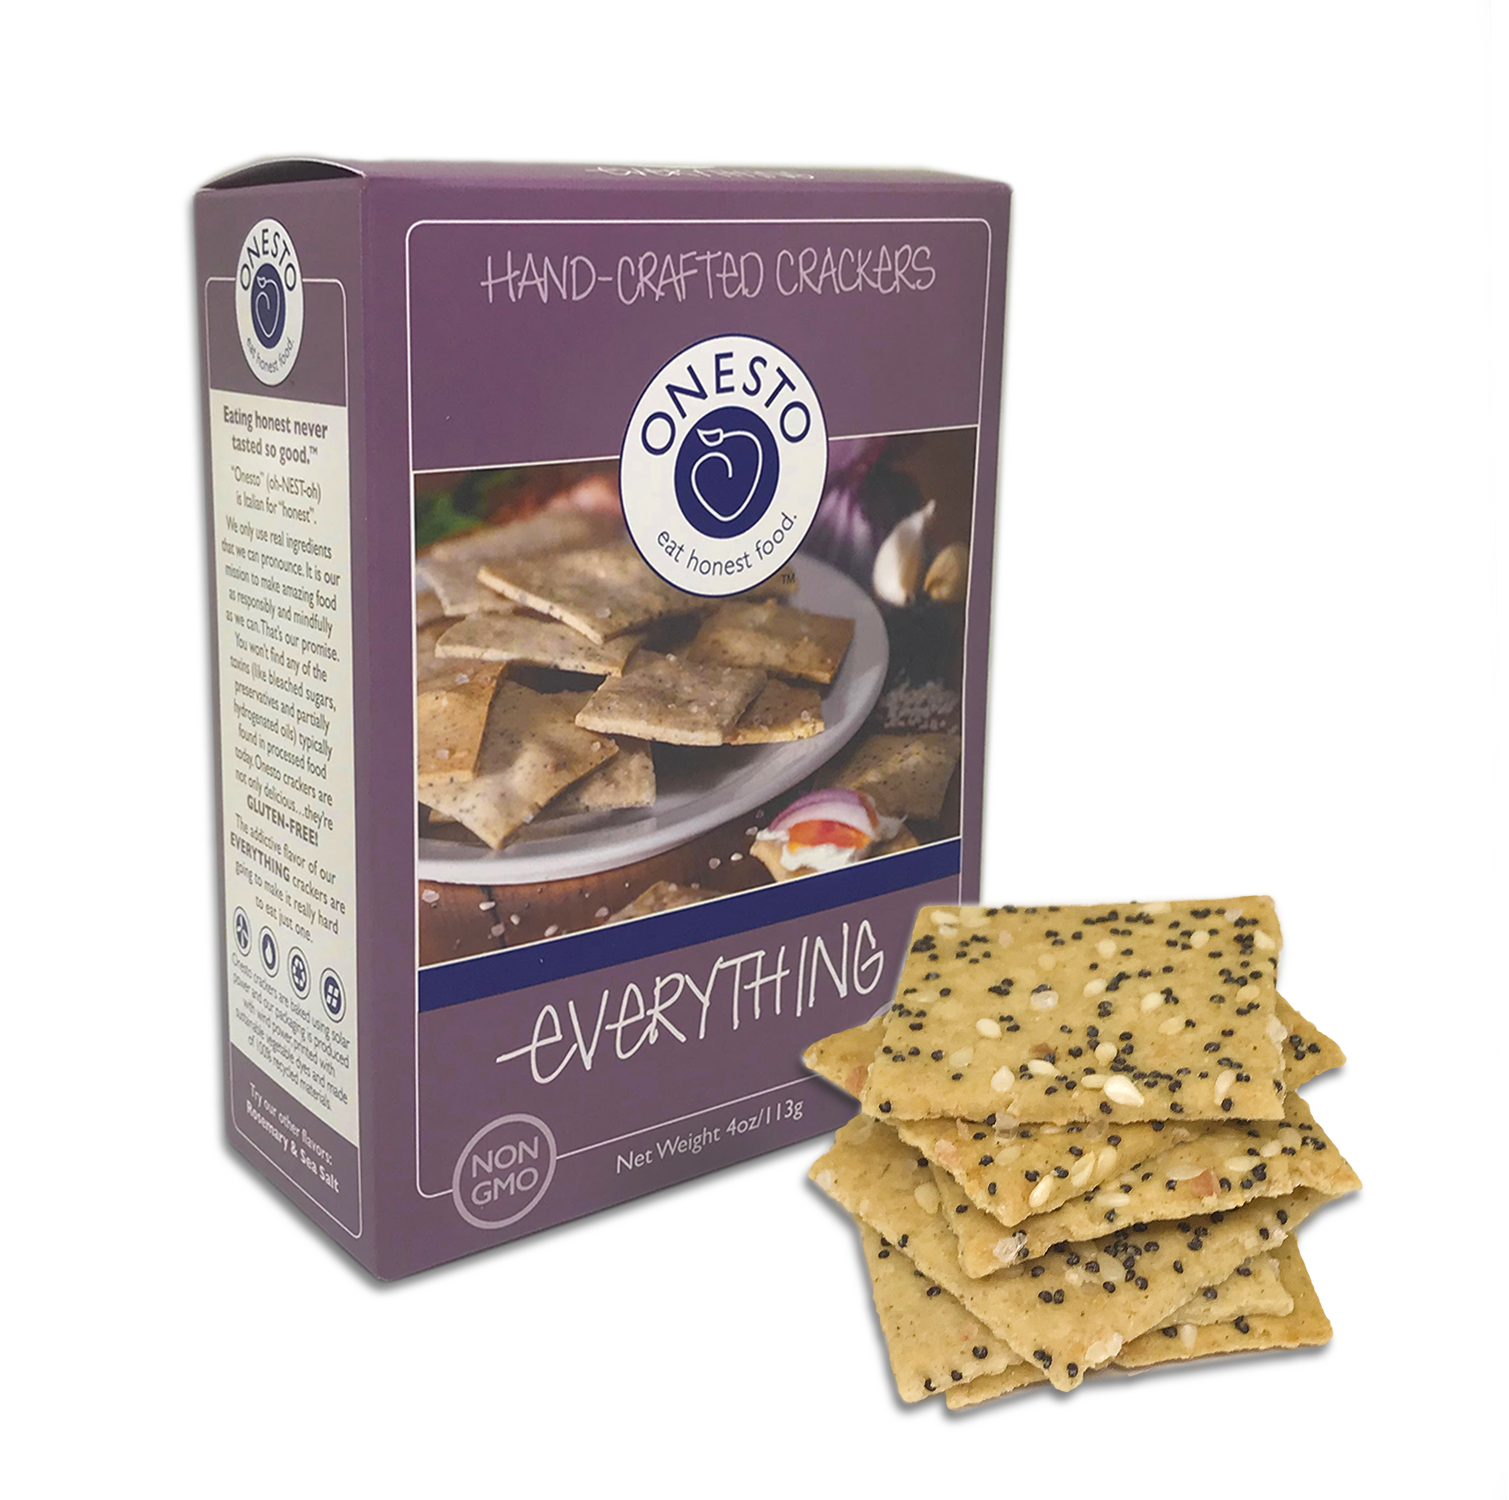 Onesto, Hand-Crafted Crackers, Everything, 4 oz